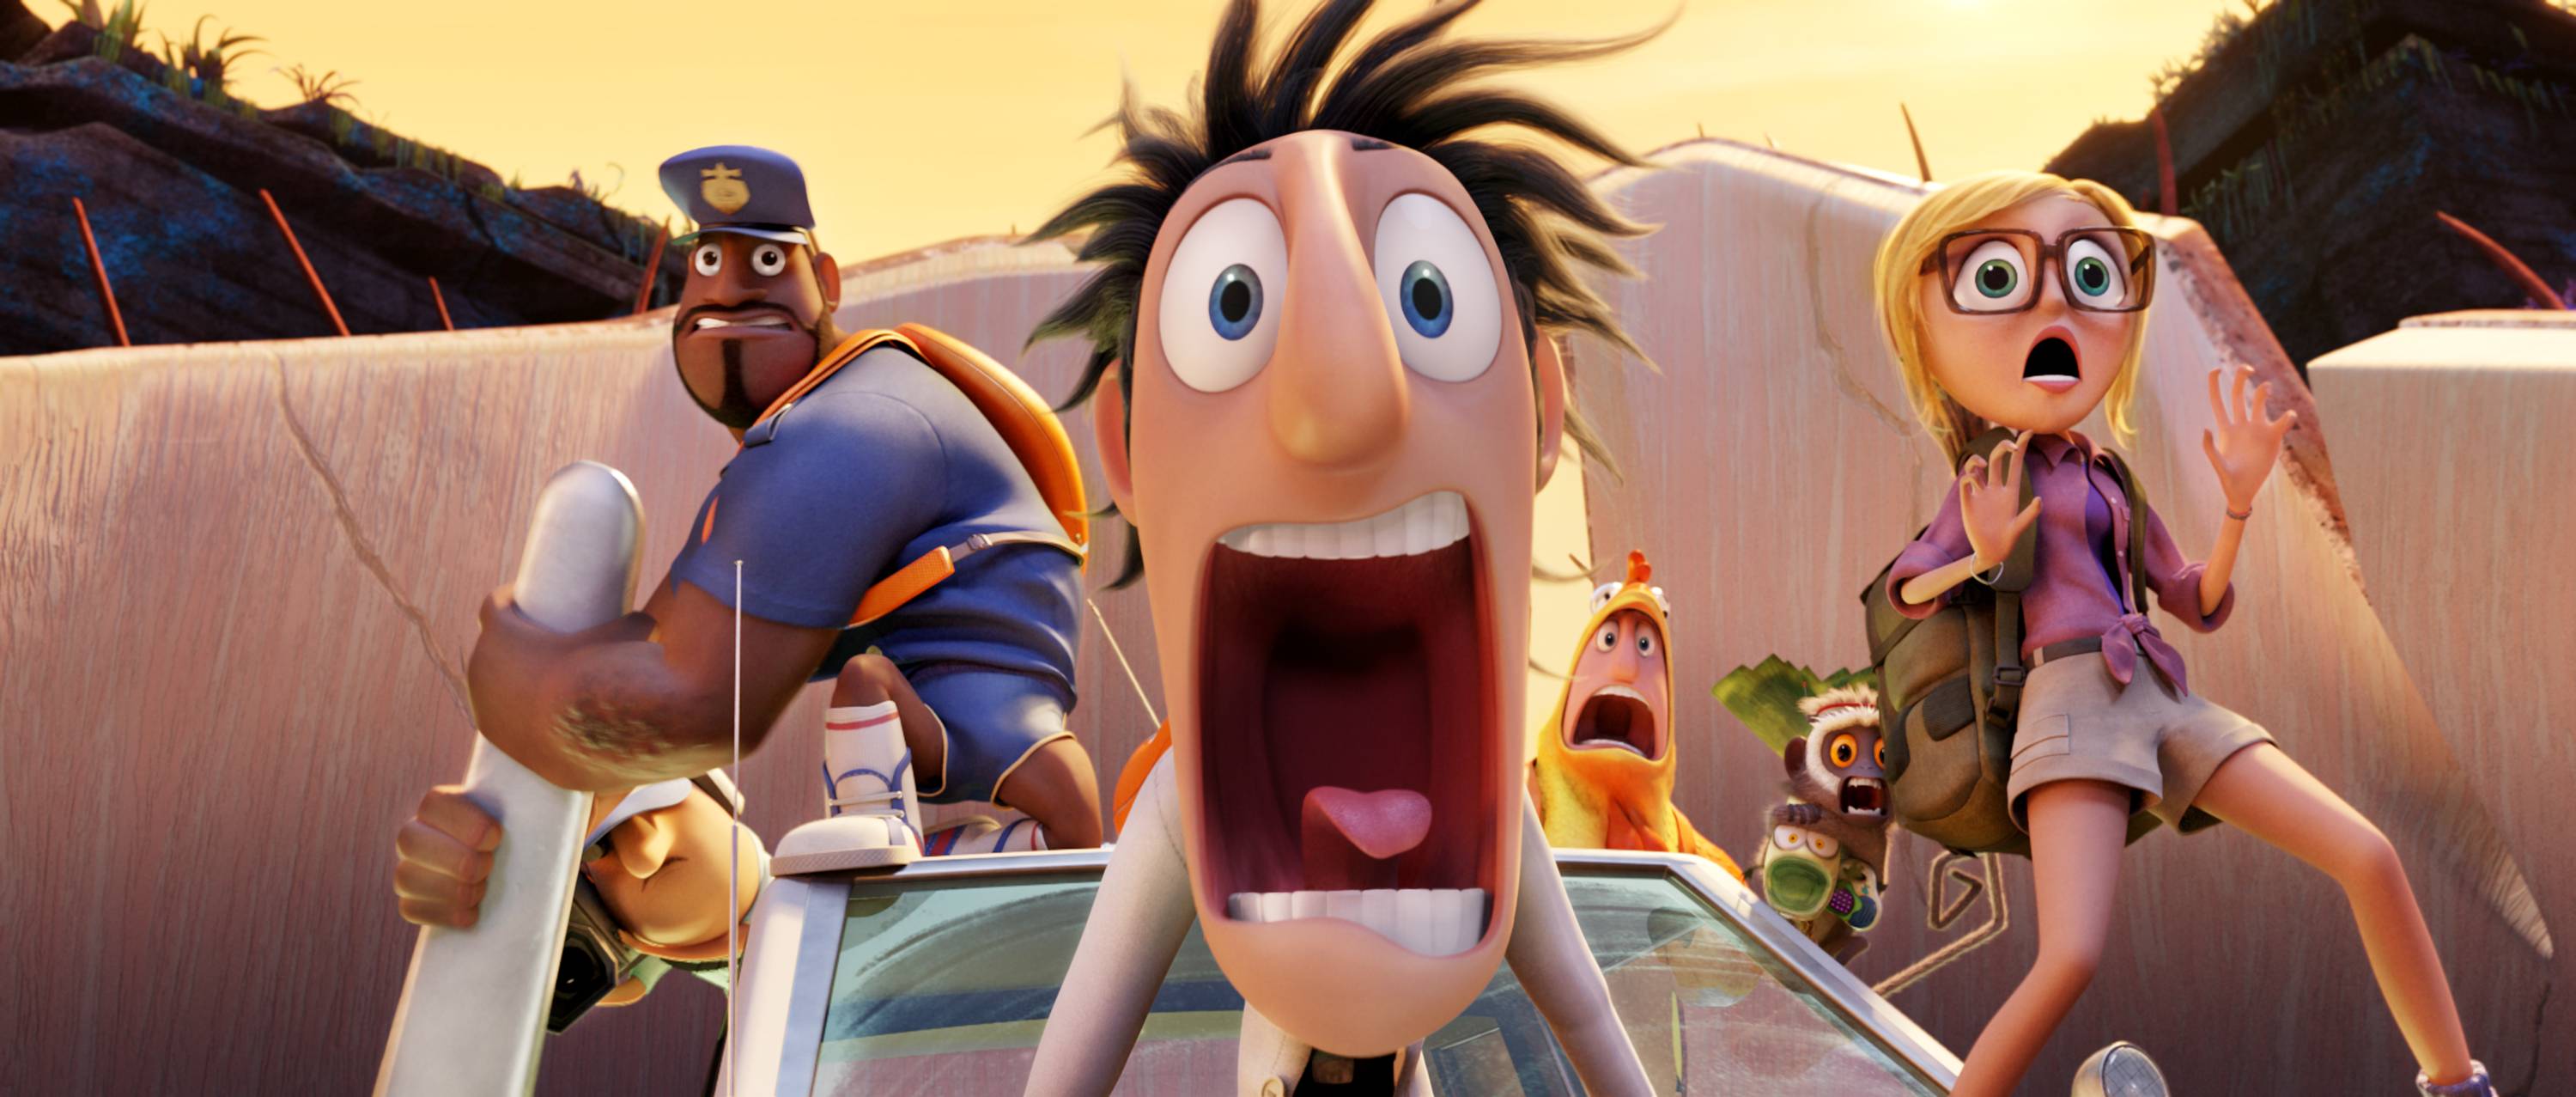 Wallpapers comedy Cloudy 2 Revenge of GMO Cloudy with a Chance of Meatballs 2 on the desktop